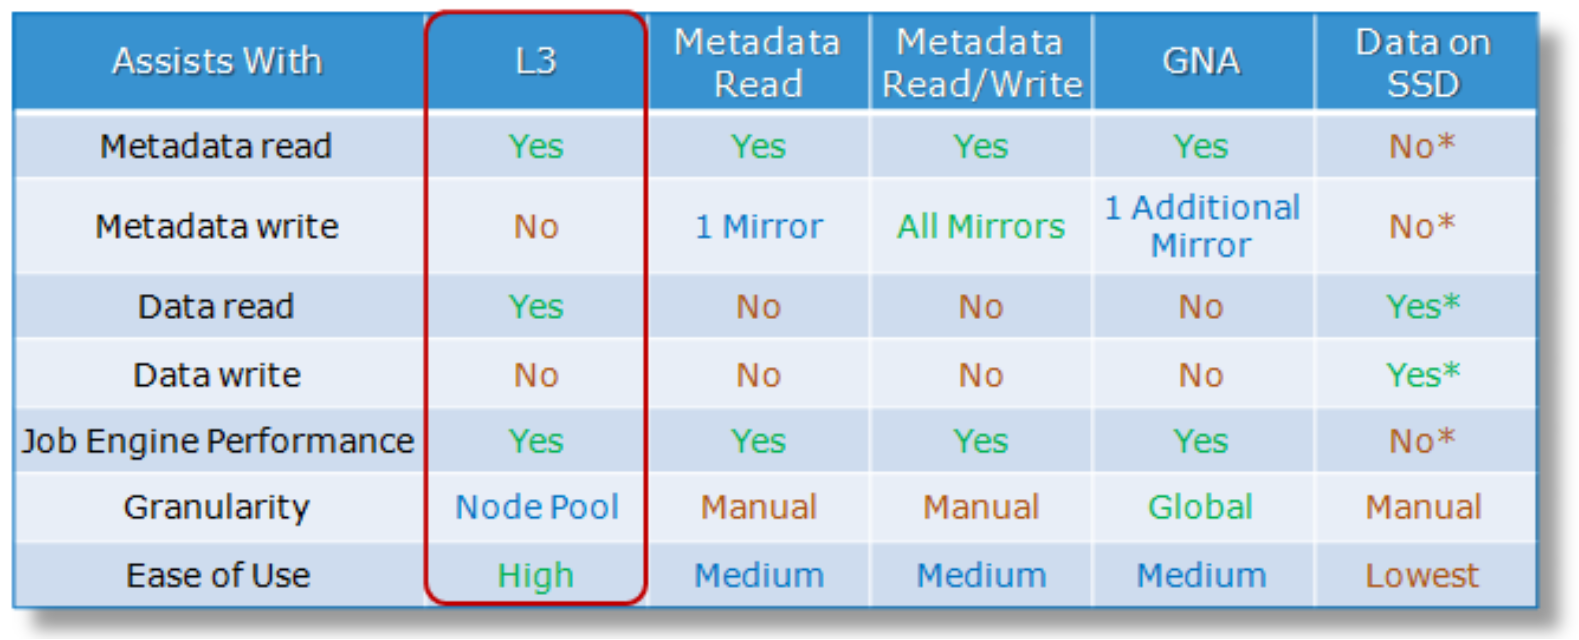 Table showing a comparison between the various SSD strategies including L3 cache, metadata read, metadata write, GNA, and data on SSD.